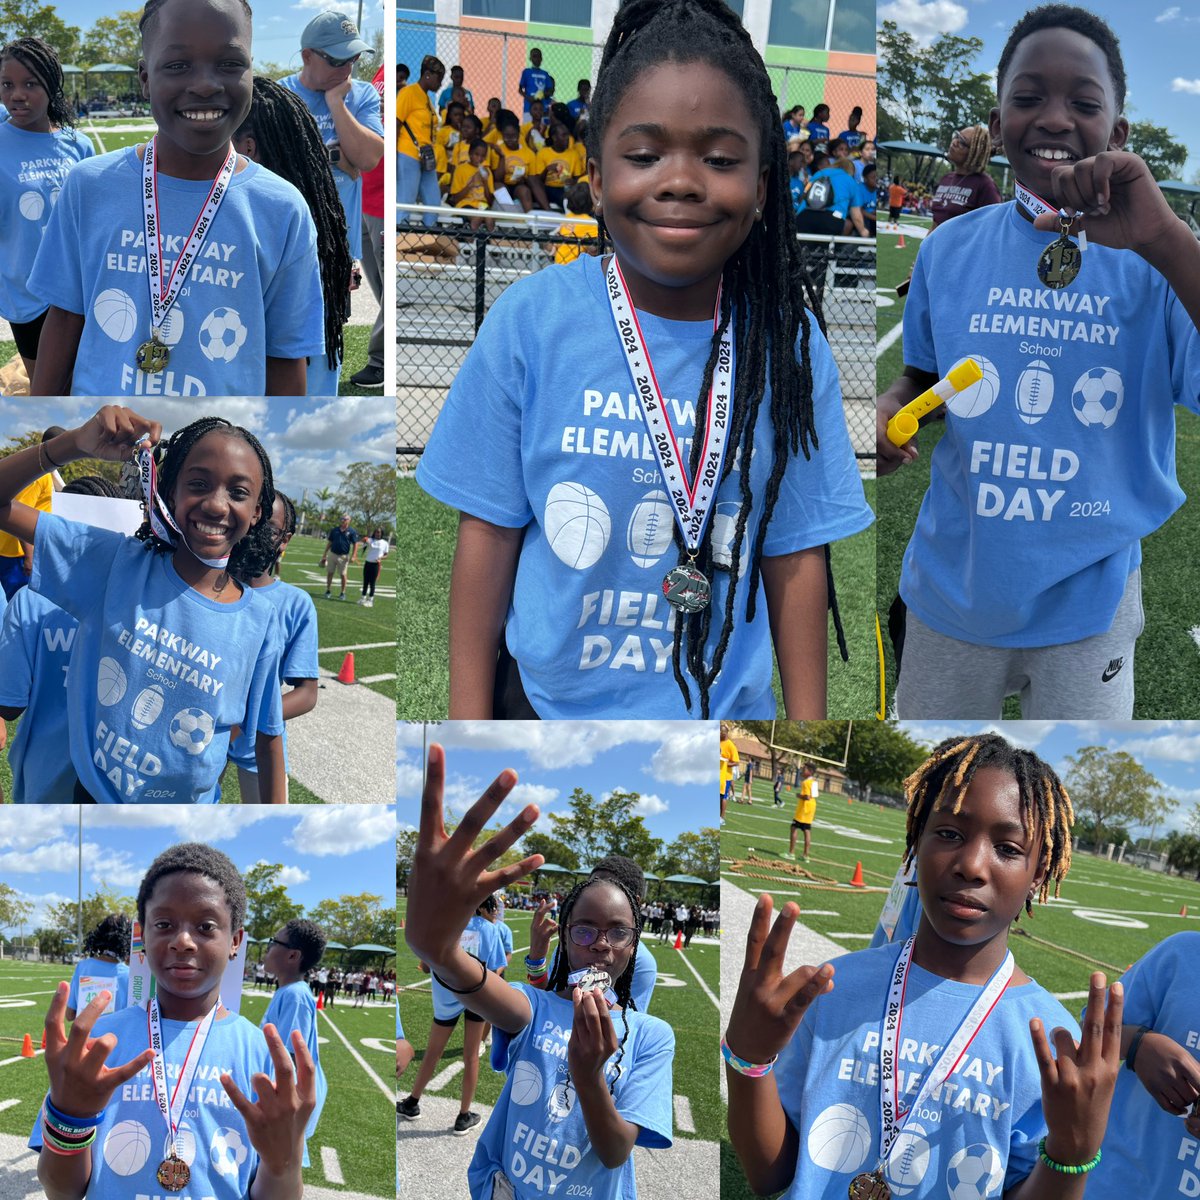 Thank you @docstevegallon for today’s event! The District 1 Student Field Day was a blast and our Roadrunners look great with their new gear. 🏅 @MDCPSNorth @SuptDotres @YeseniaAponte05 #YourBestChoiceMDCPS